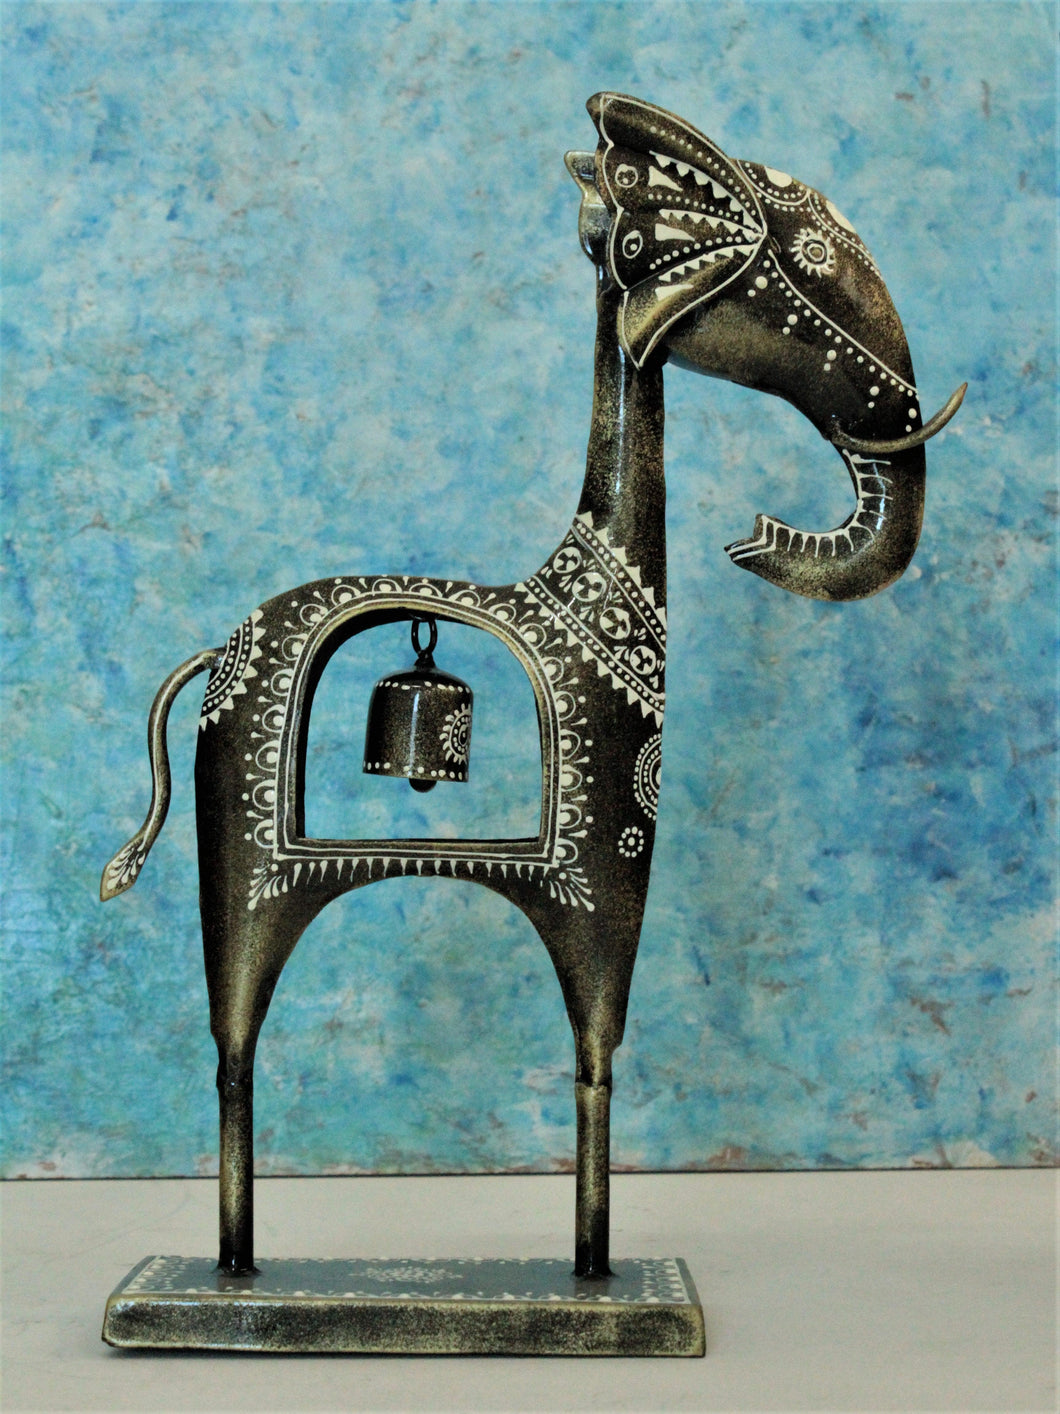 Artisan-Crafted Metal Elephant Showpiece with Hanging Bell - Style It by Hanika